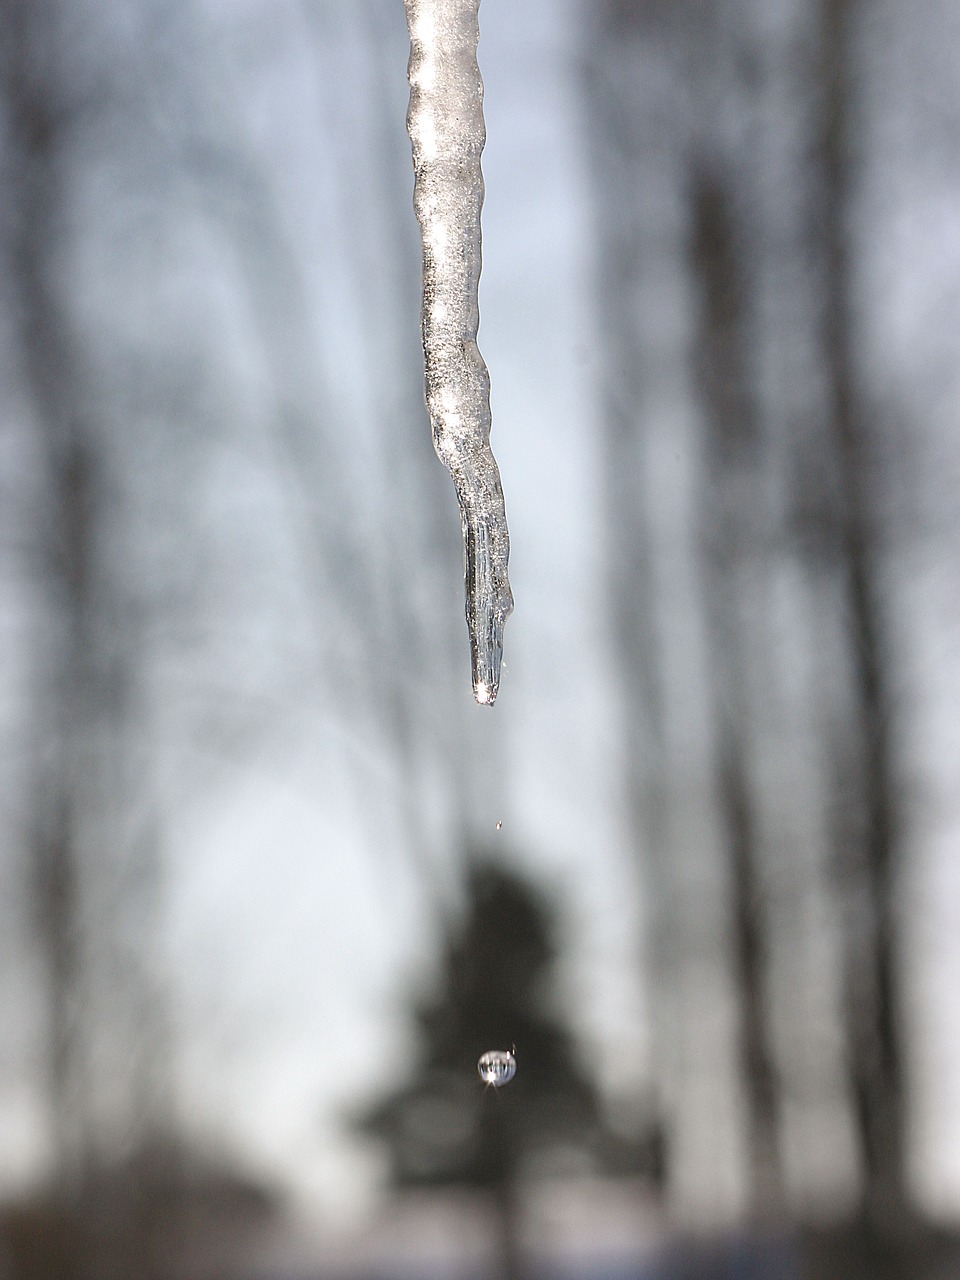 icicle winter sweden free photo